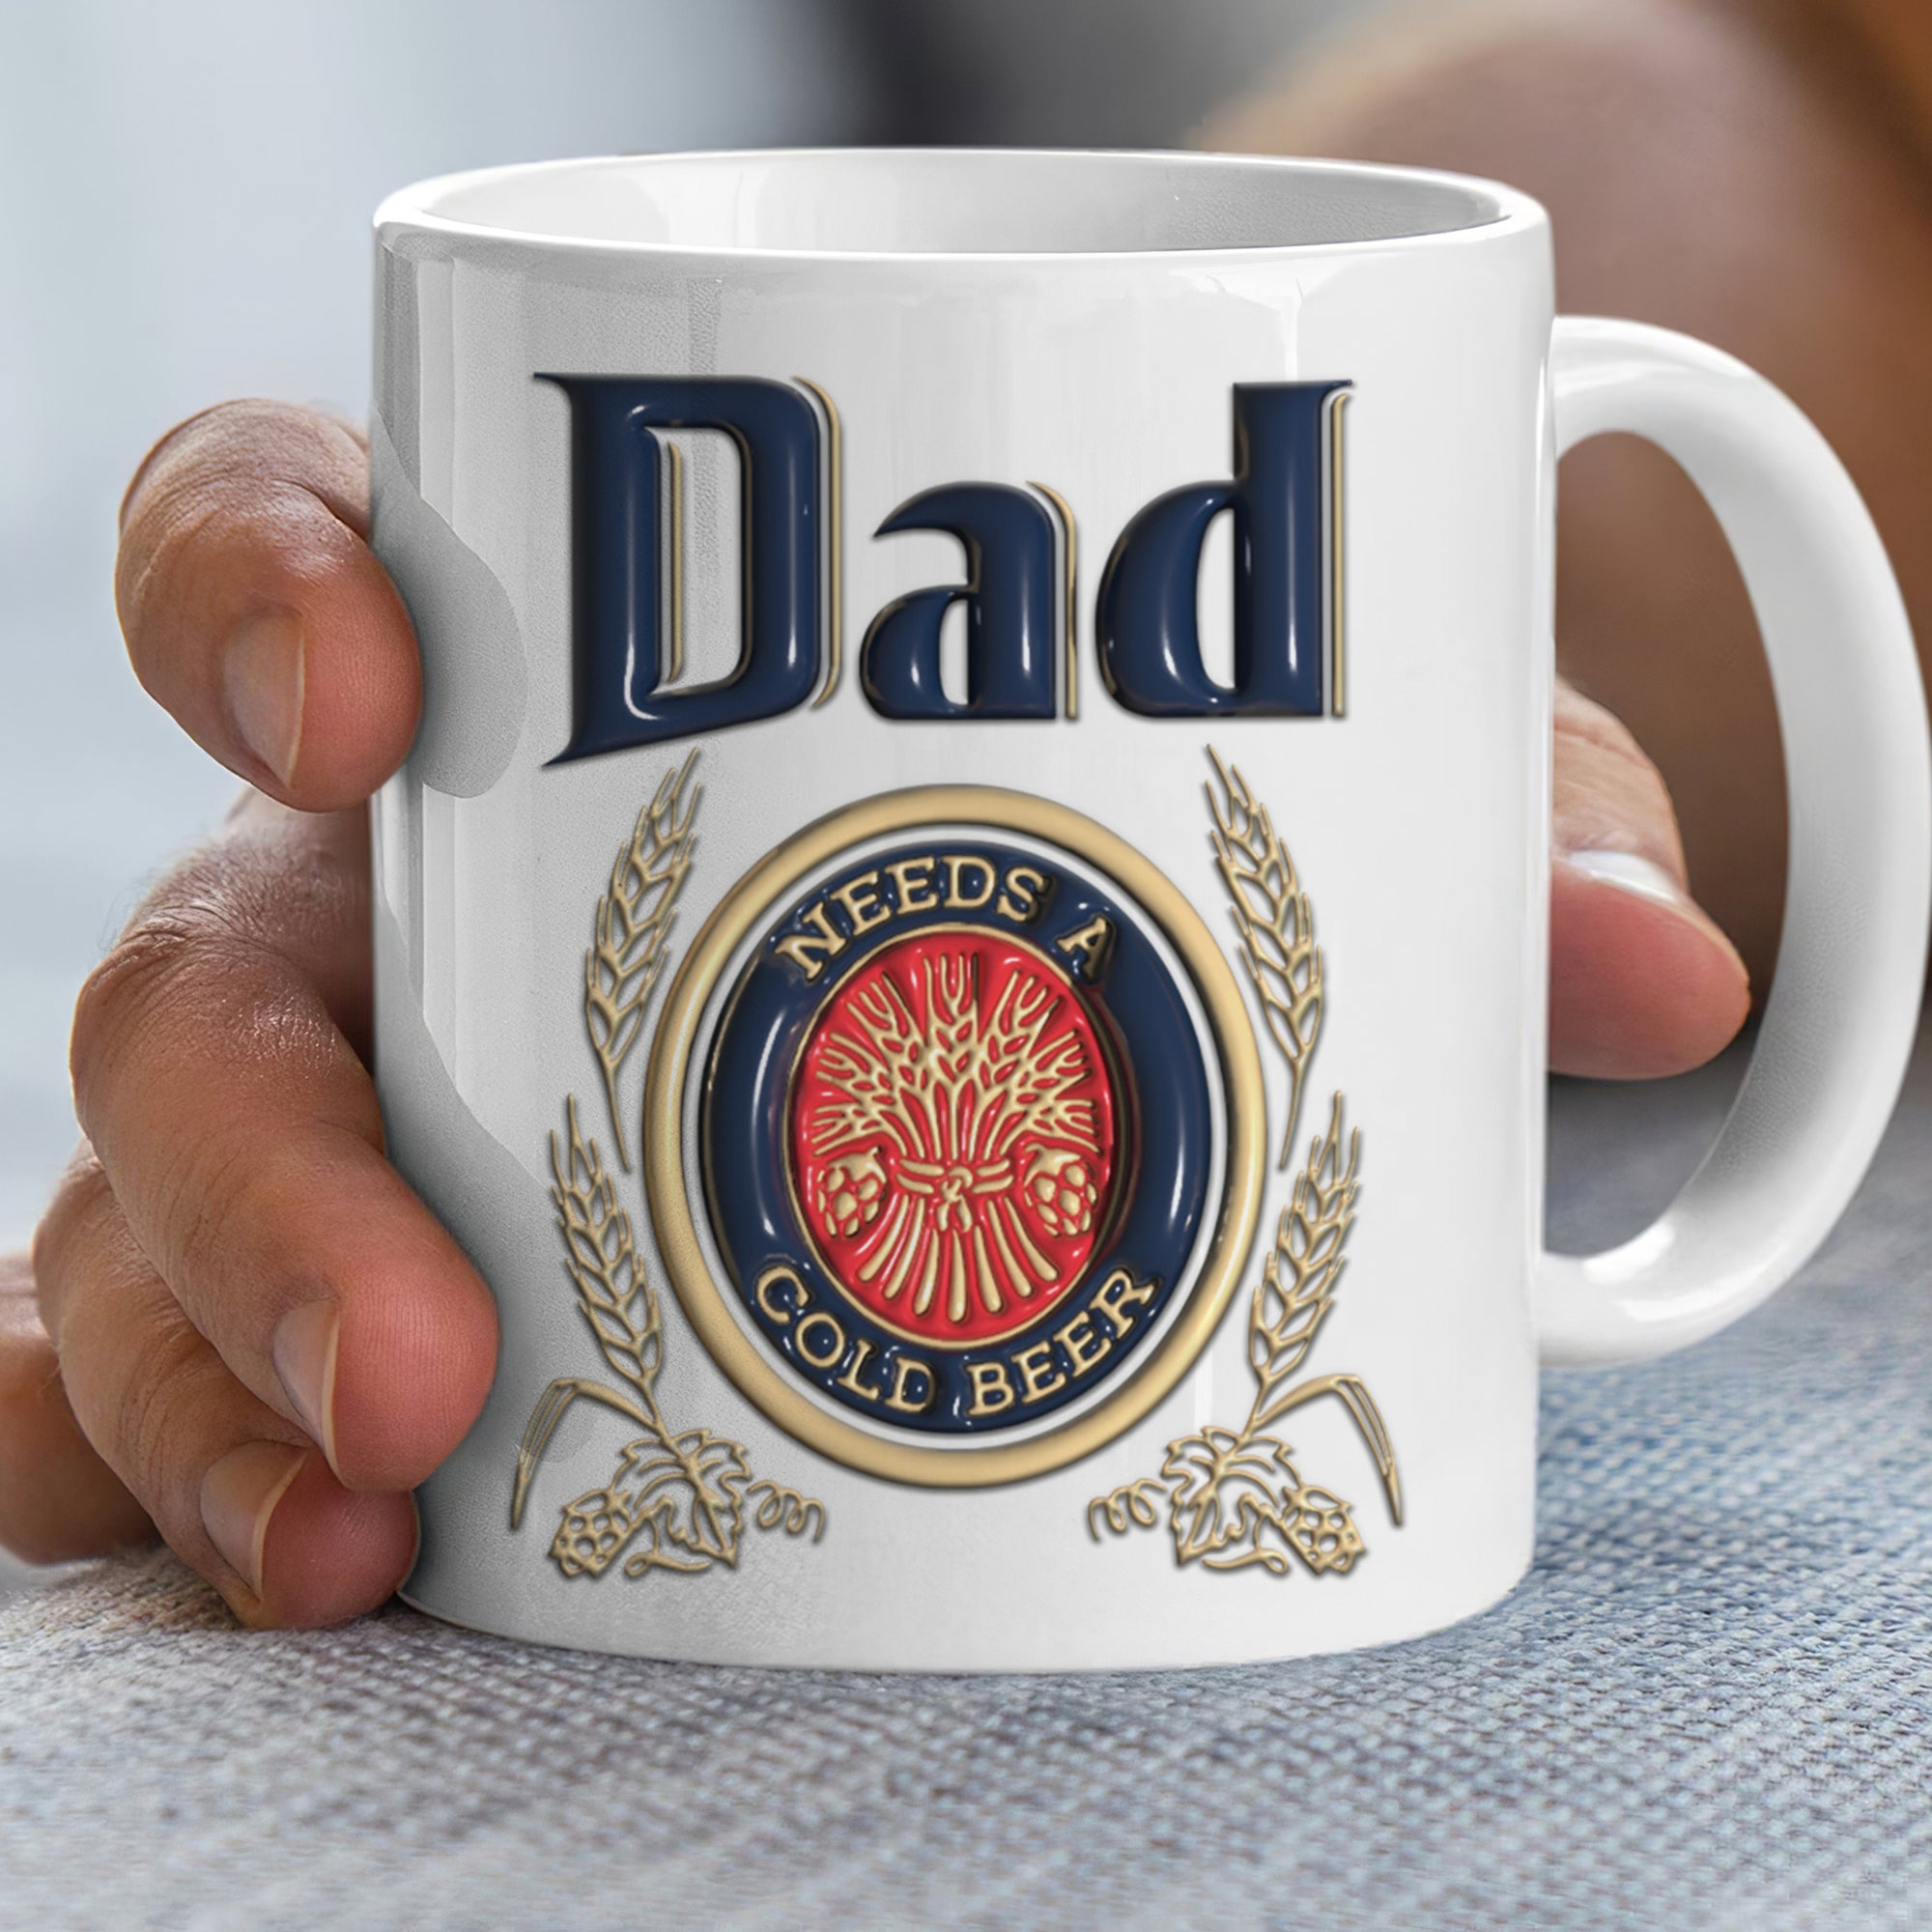 Personalized Gifts For Dad Coffee Mug 01naqn300524-Homacus